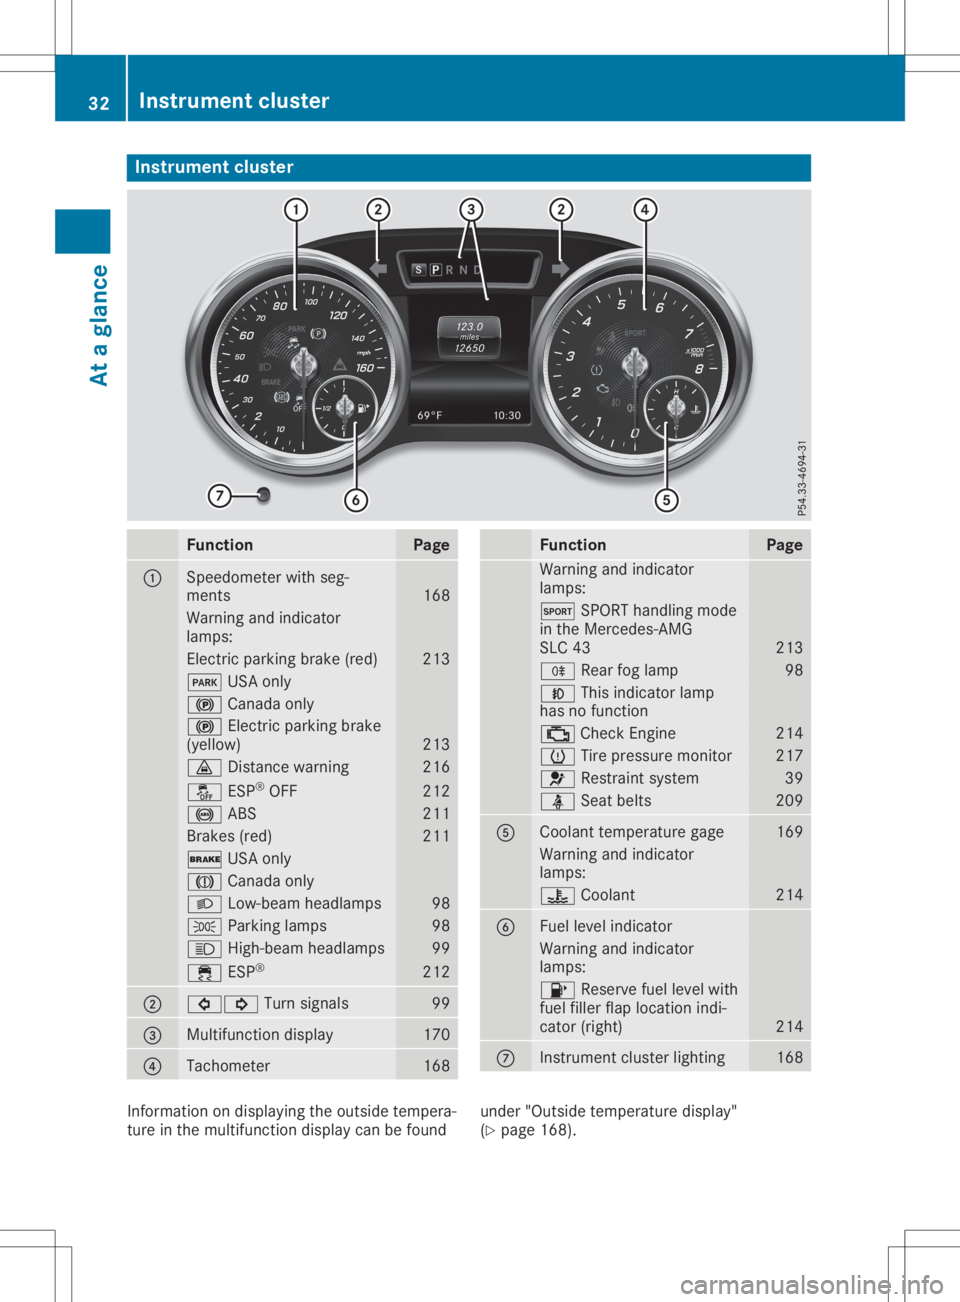 MERCEDES-BENZ SLC 2020  Owners Manual Inst
rumen tclus ter Funct
ion Pag
e 0043
Sp
eedo meterwit hseg-
men ts 16
8 Warn
ingand indicat or
lamp s: El
ec tric park ingbrak e(red) 21
3 0049
USAo nly 0024
Canad aonly 0024
Elec tric park ingbr